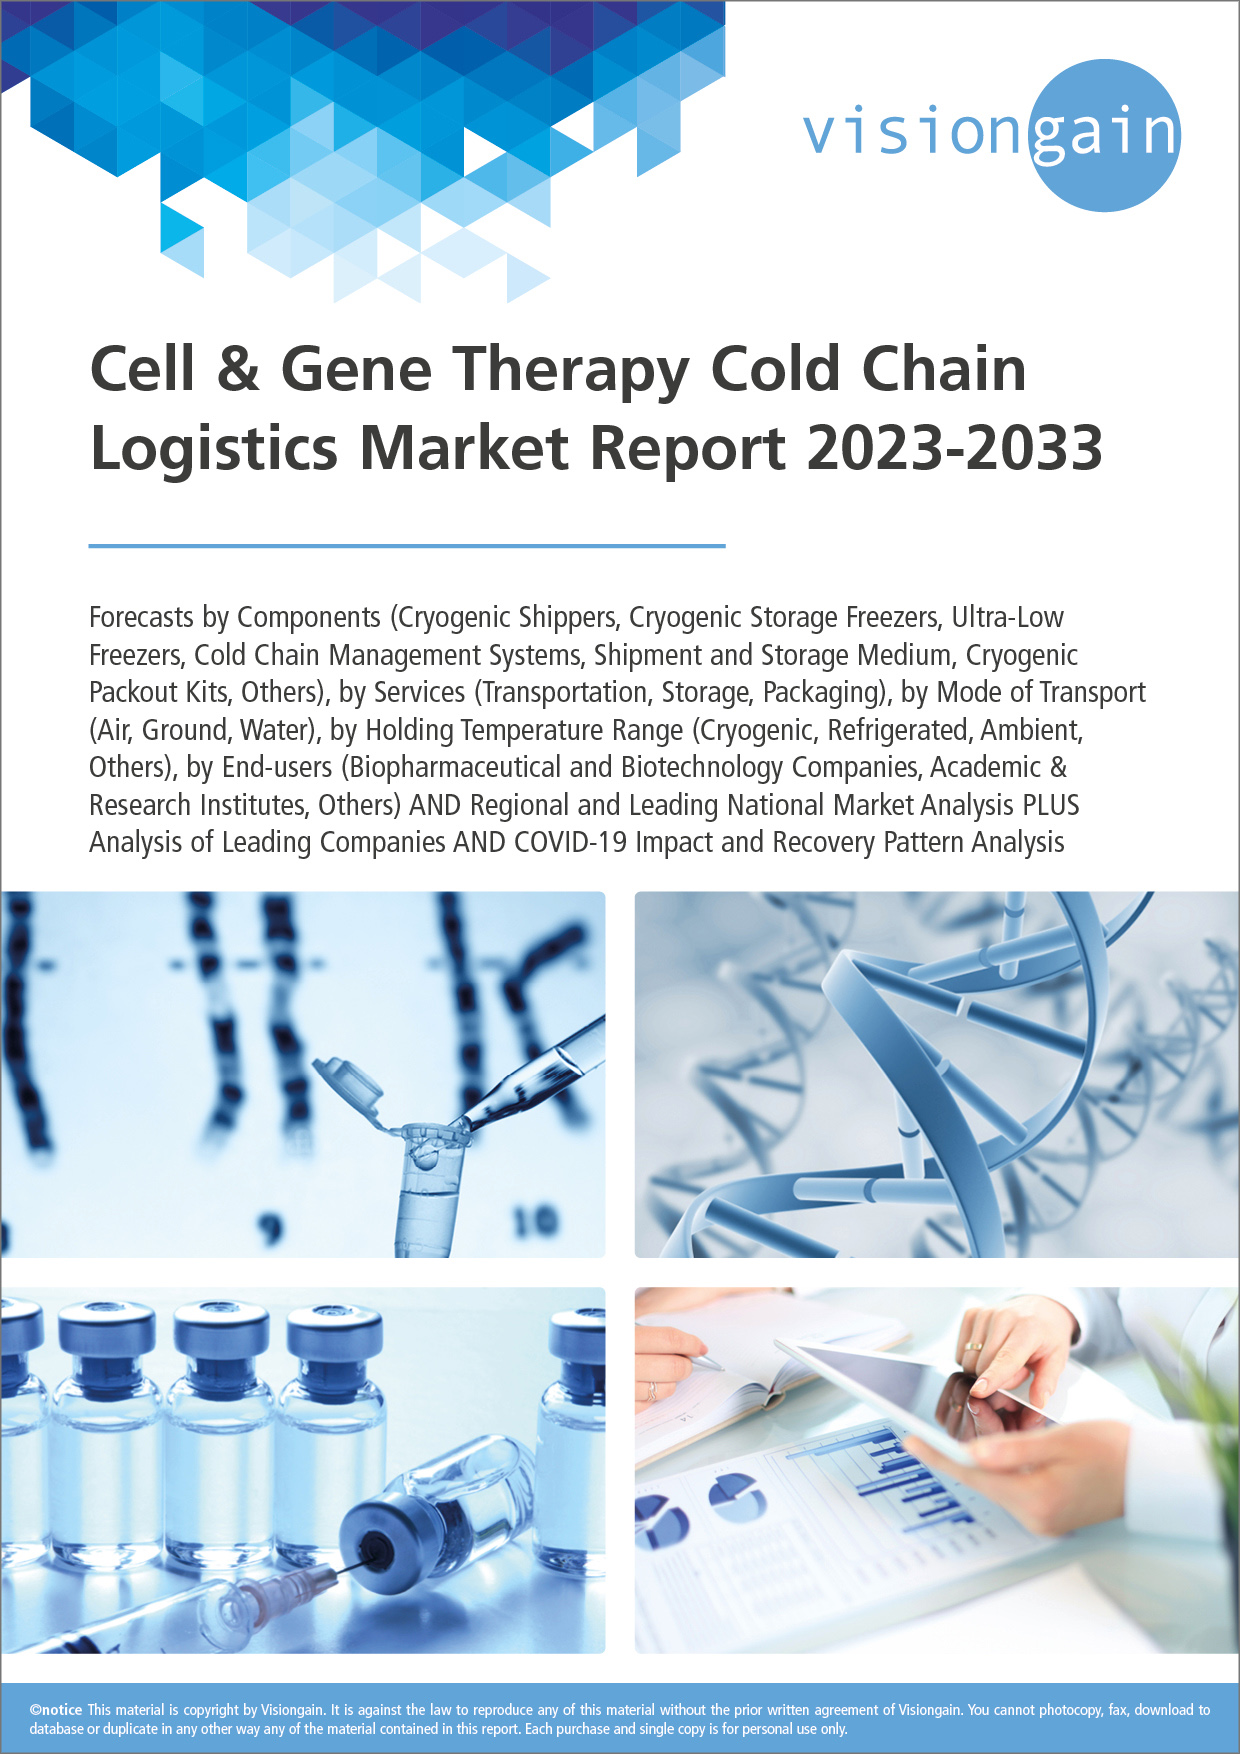 Cell & Gene Therapy Cold Chain Logistics Market Report 2023-2033